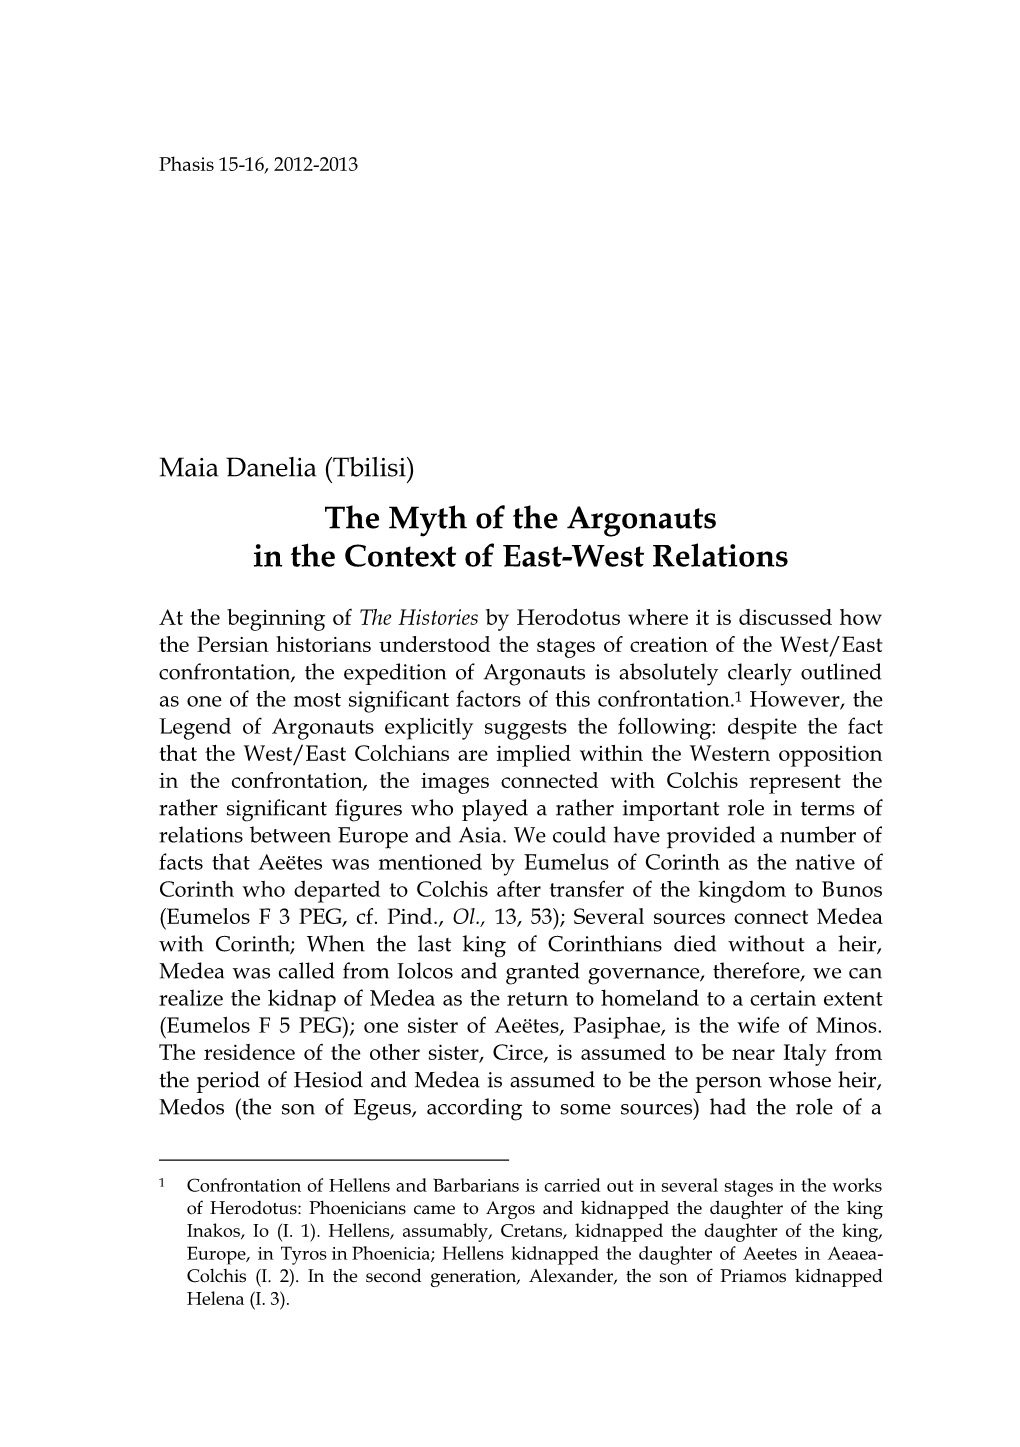 The Myth of the Argonauts in the Context of East-West Relations